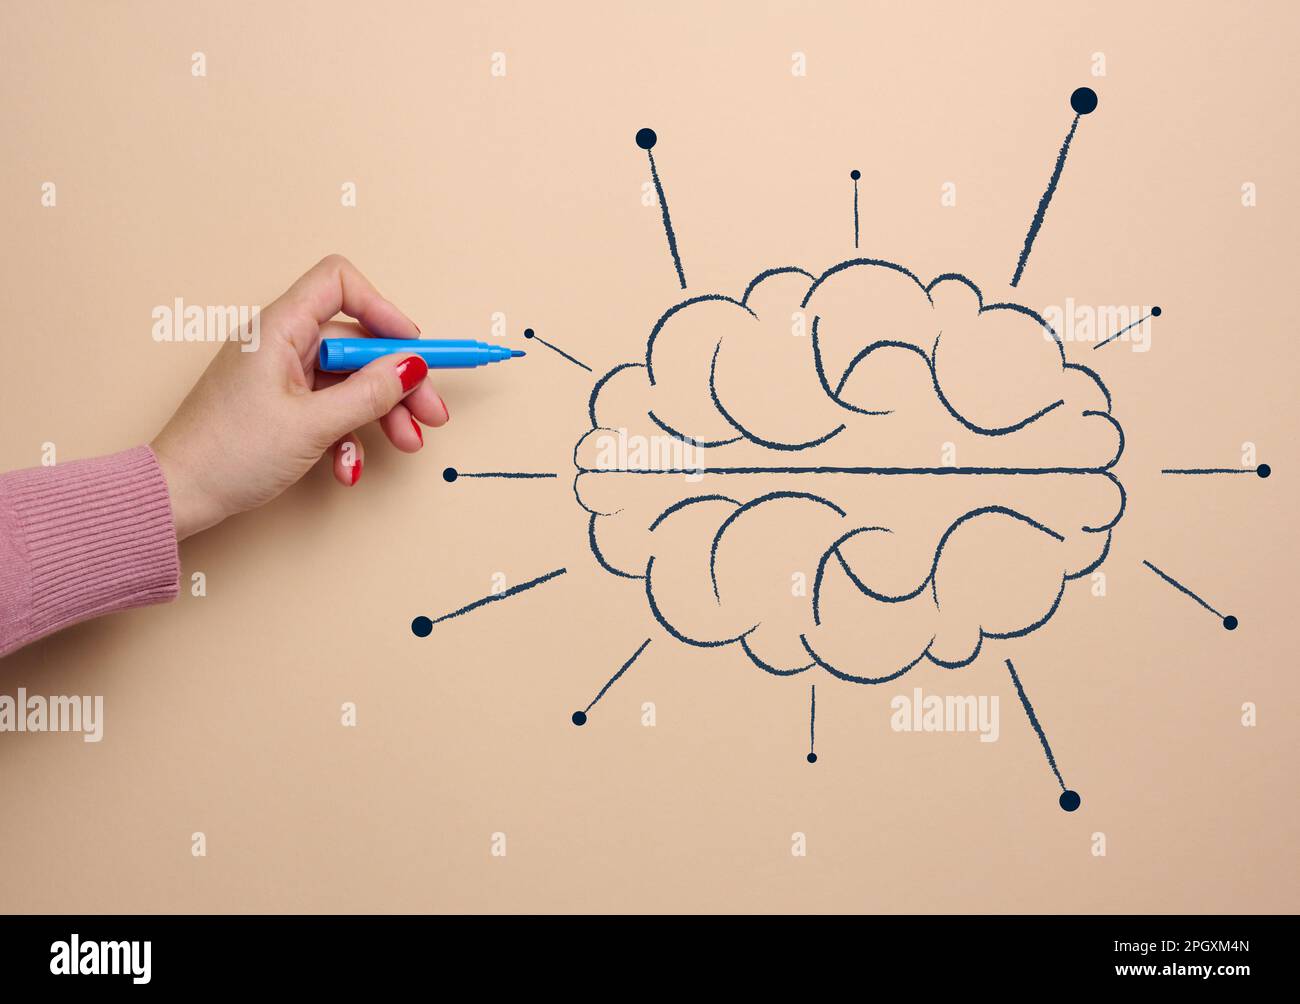 Human brain drawn with marker, concept of learning artificial intelligence  by adding information Stock Photo - Alamy